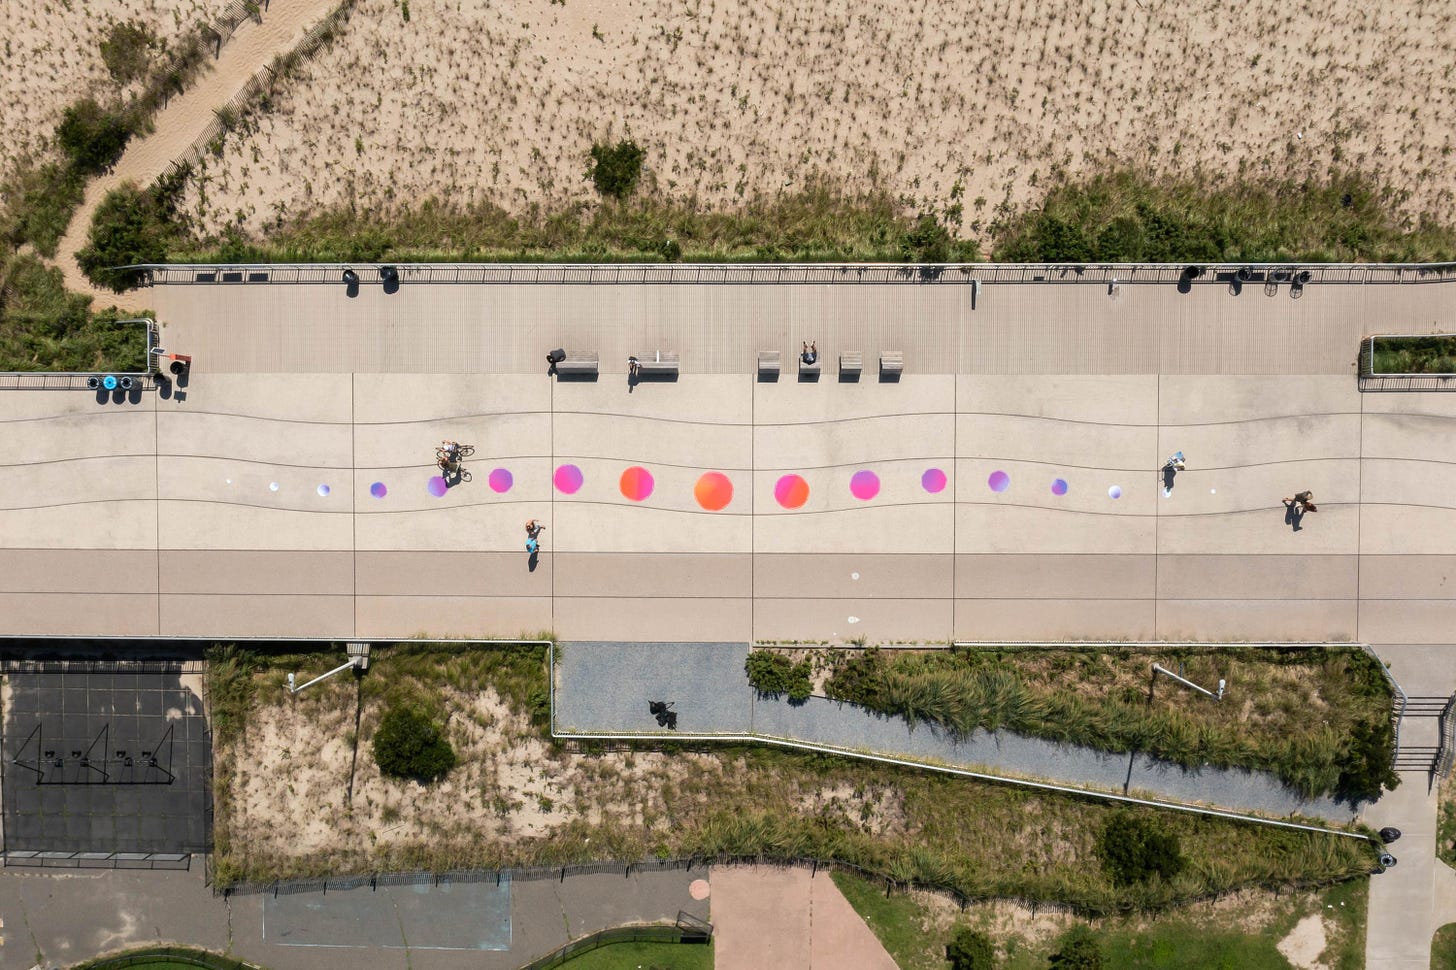 A shot from above looking straight down at the ground, like you’re within 5 minutes of landing on an airplane. Along a cement boardwalk next to a sandy beach, there are colorful spots that grow larger in sequence, gently curving within the wavy lines of the cement blocks.